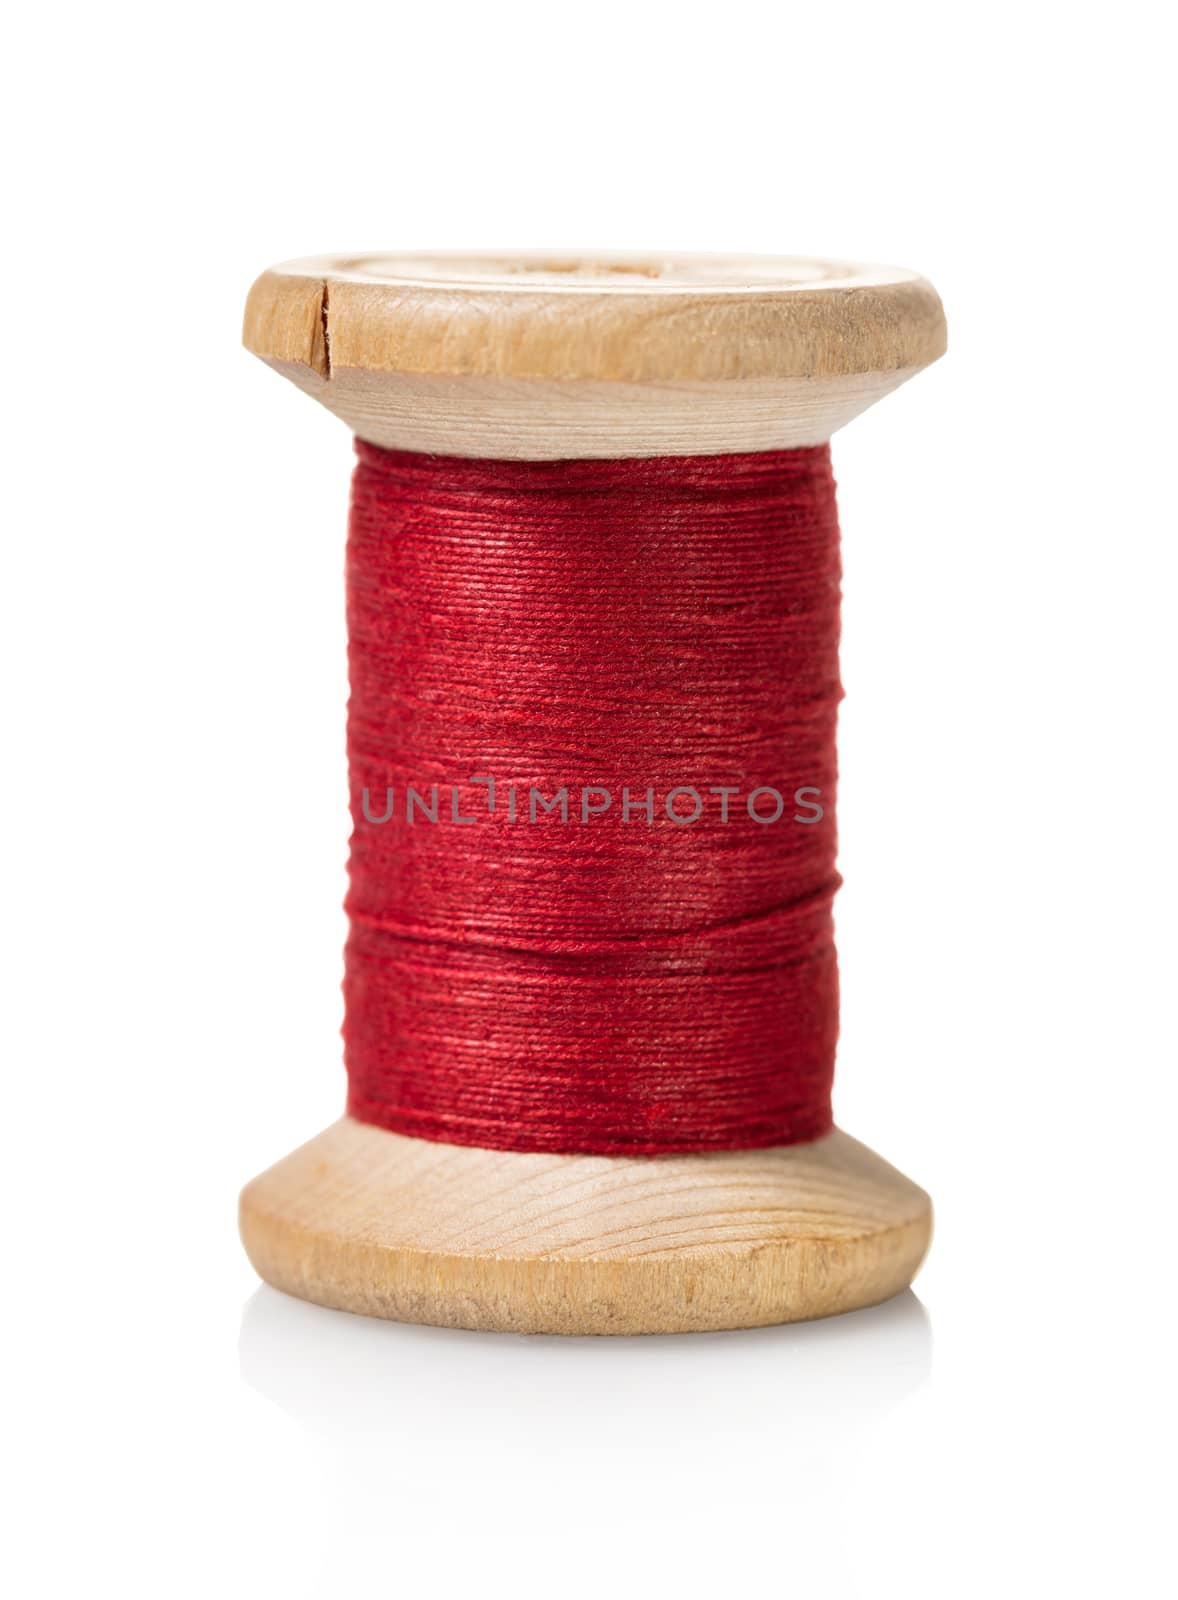 spool of red thread by MegaArt